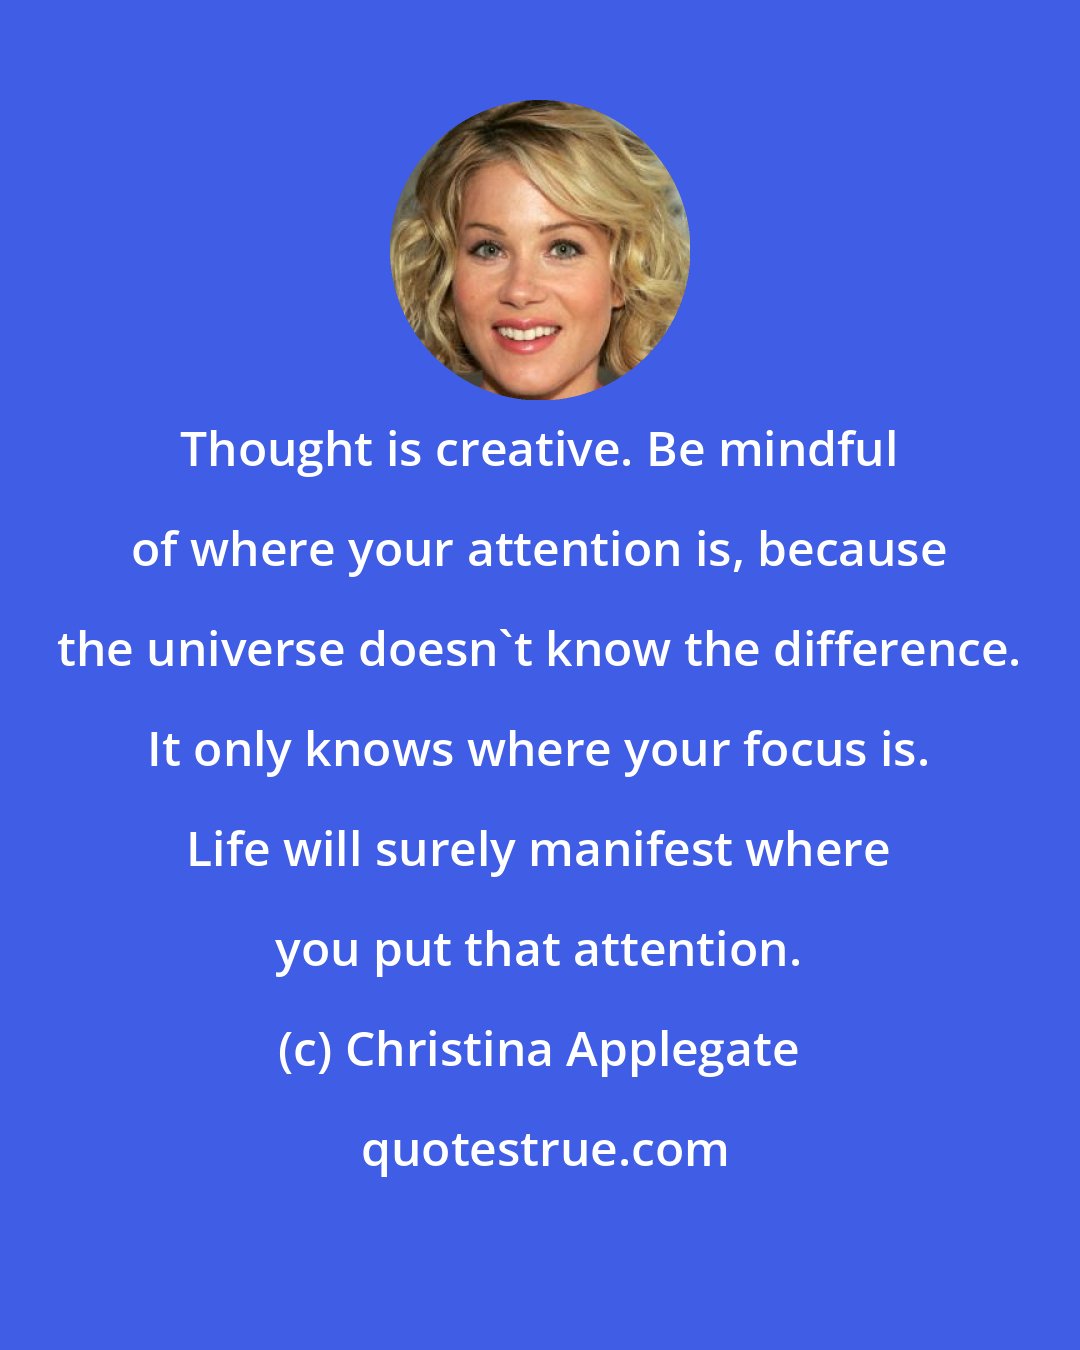 Christina Applegate: Thought is creative. Be mindful of where your attention is, because the universe doesn't know the difference. It only knows where your focus is. Life will surely manifest where you put that attention.